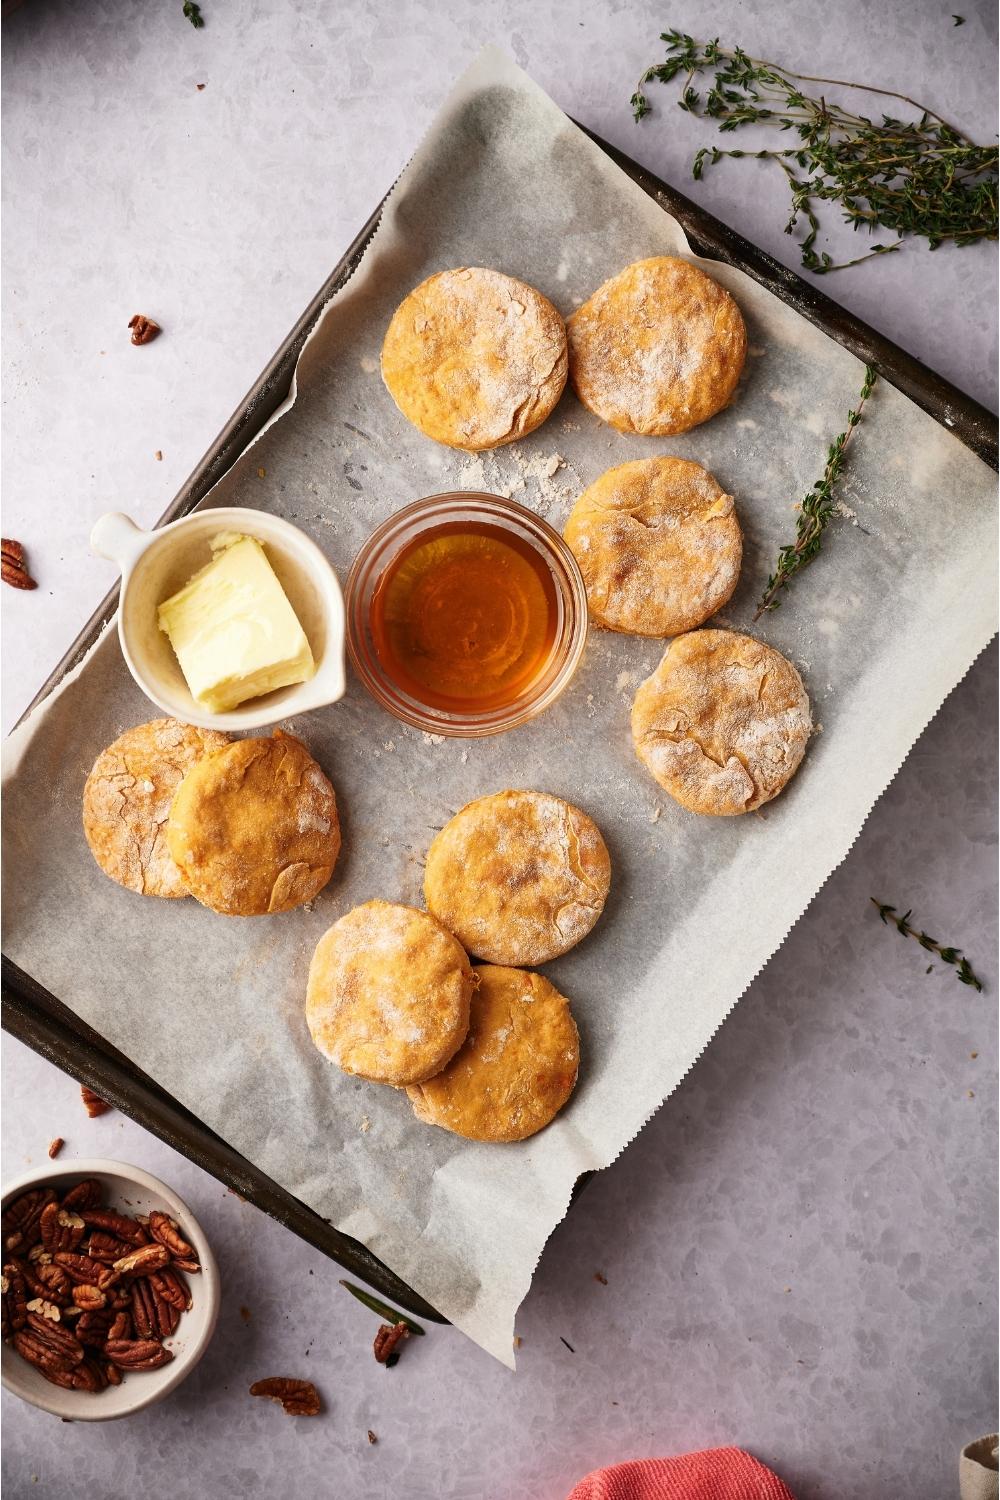 Sweet potato biscuits on a baking sheet lined with parchment paper next to bowls of butter and maple syrup.